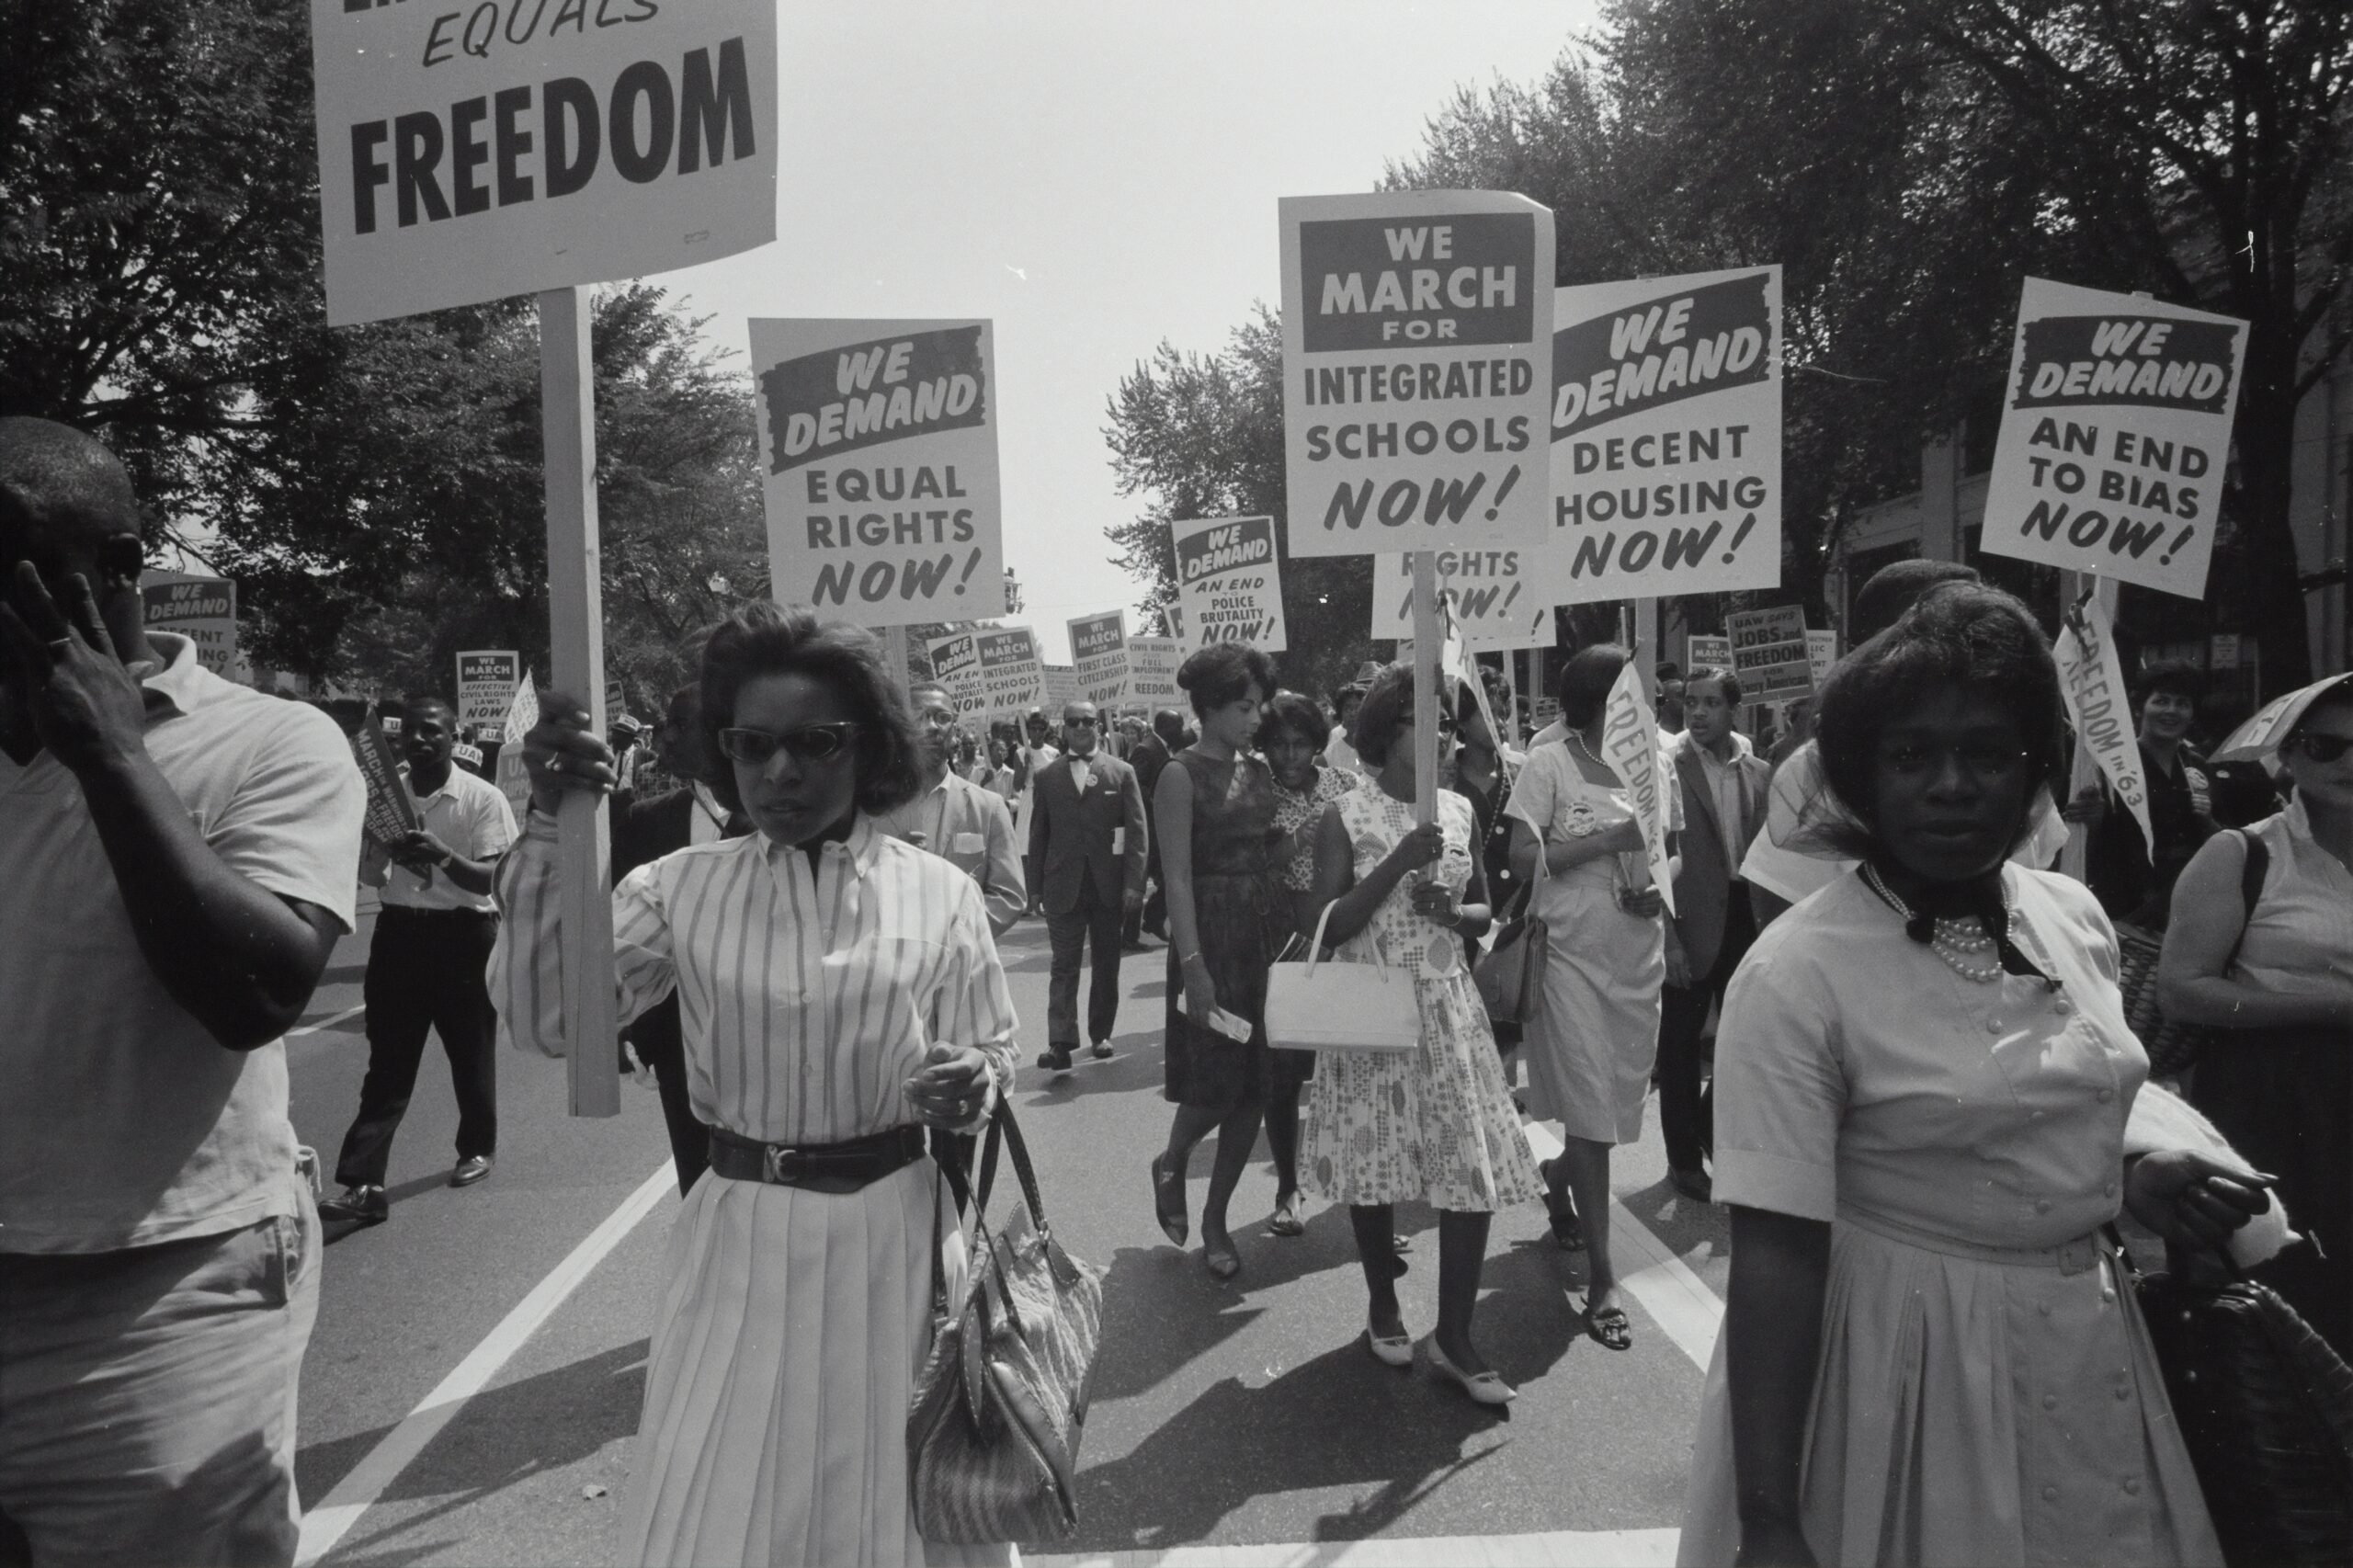 Black women marching for equal rights